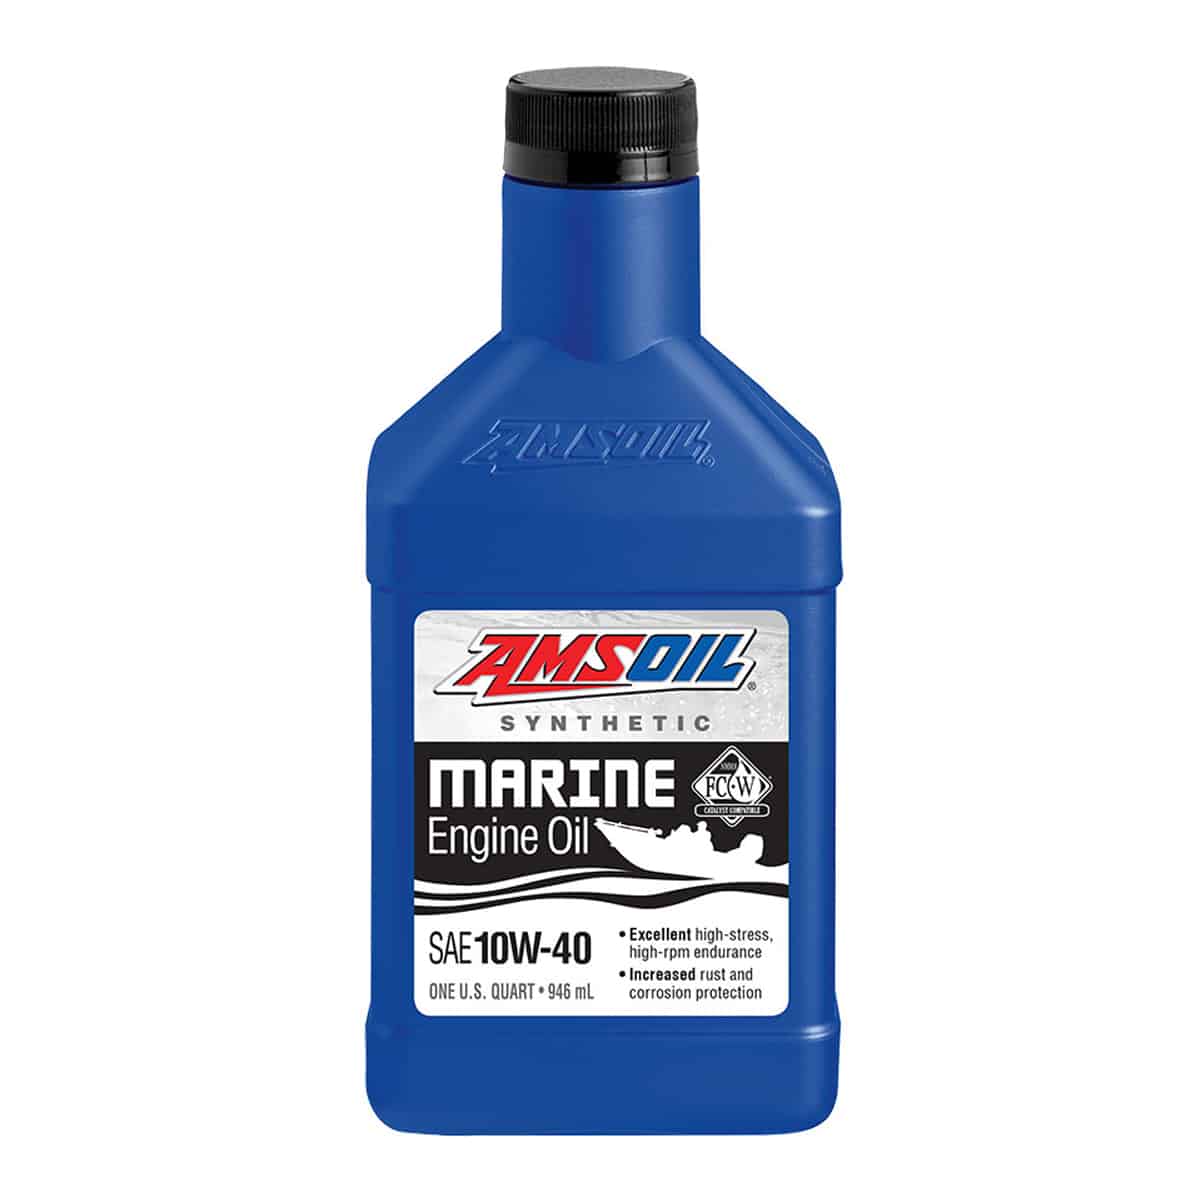 A bottle of AMSOIL Synthetic Marine Engine Oil - a formulation designed to withstand the heat, stress of high-rpm operation and deliver wear protection.